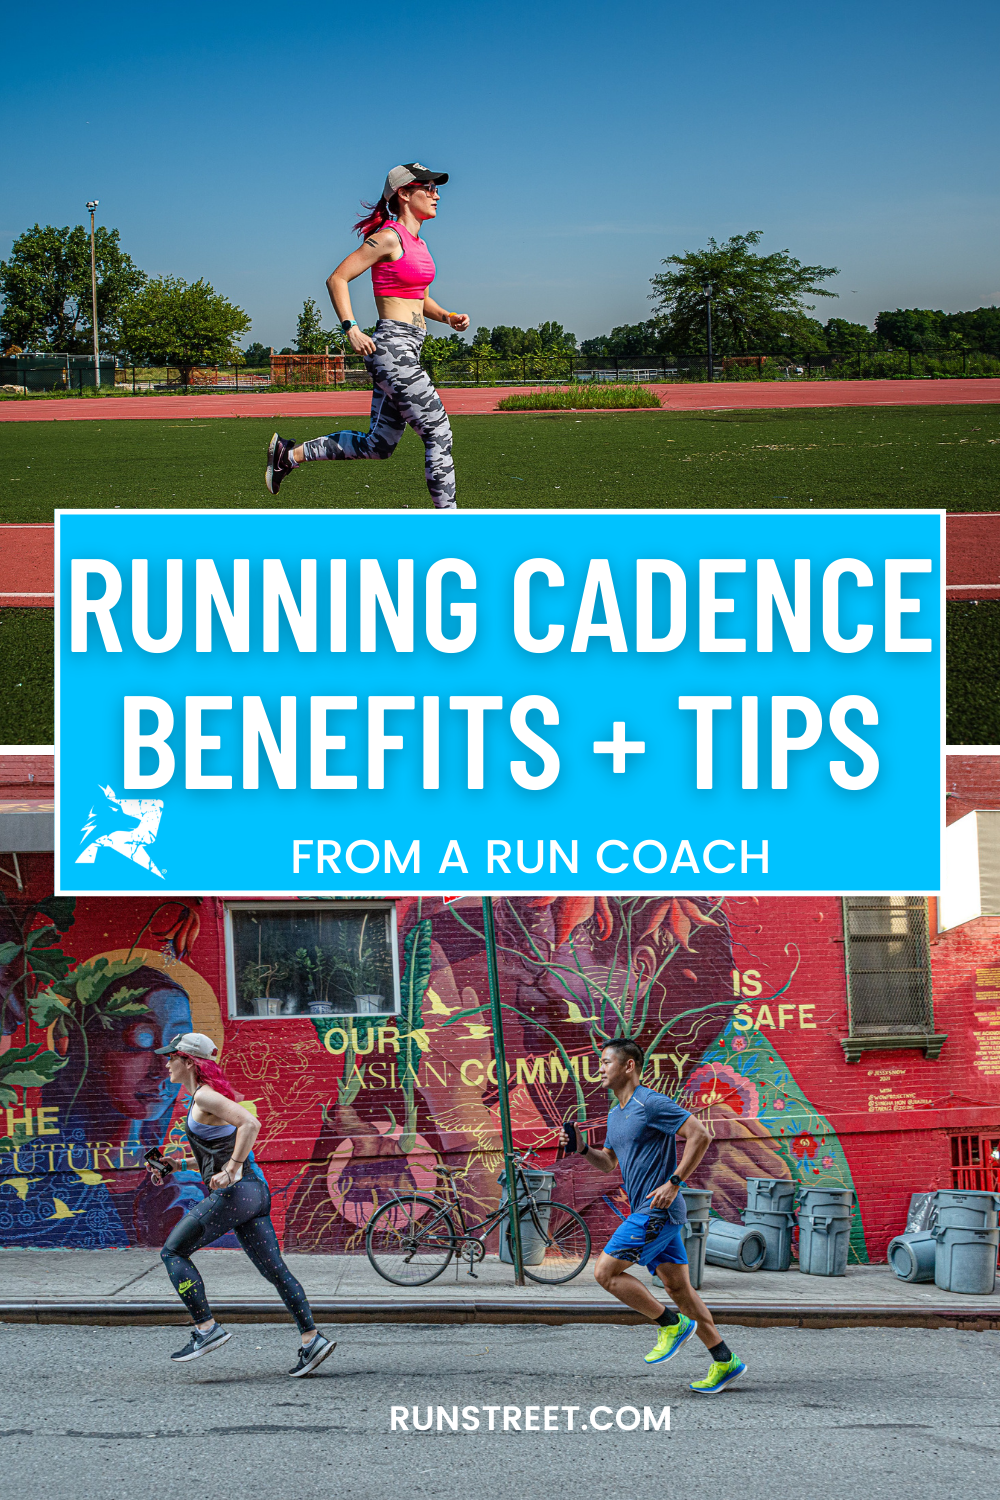 Cadence & Speed: Take More Steps to Run Faster